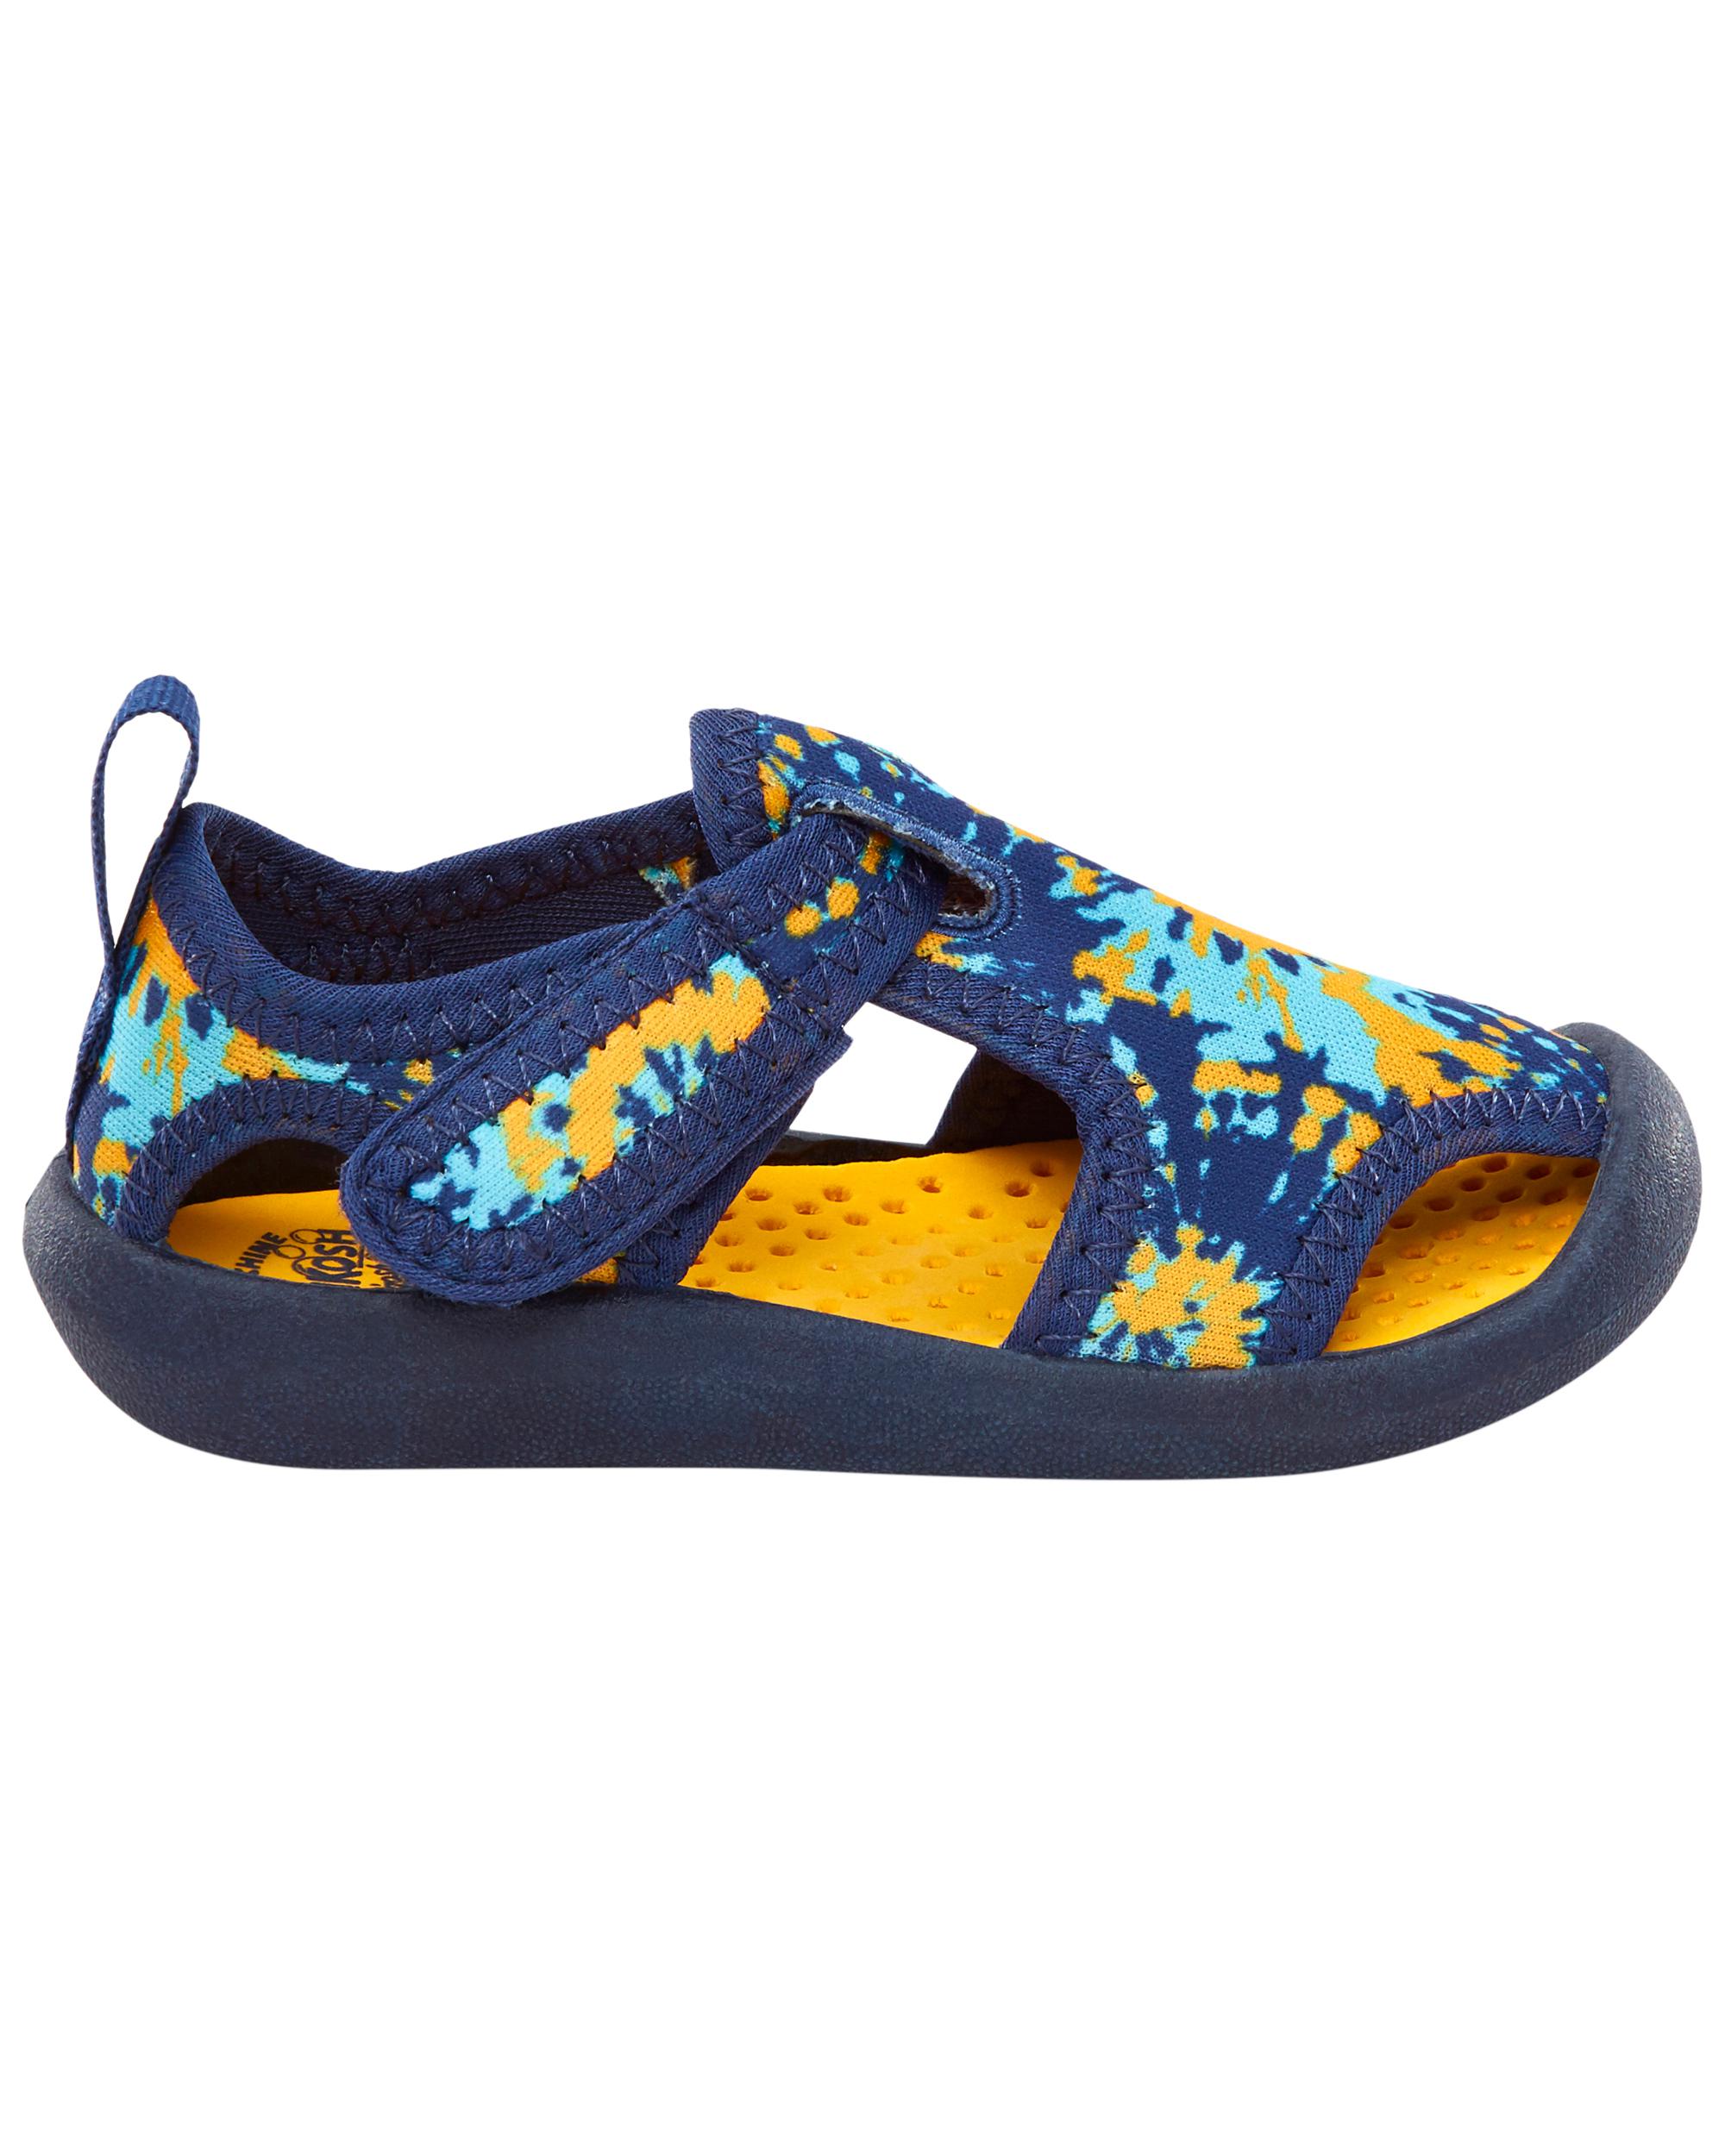 Multi Slip-On Water Shoes 